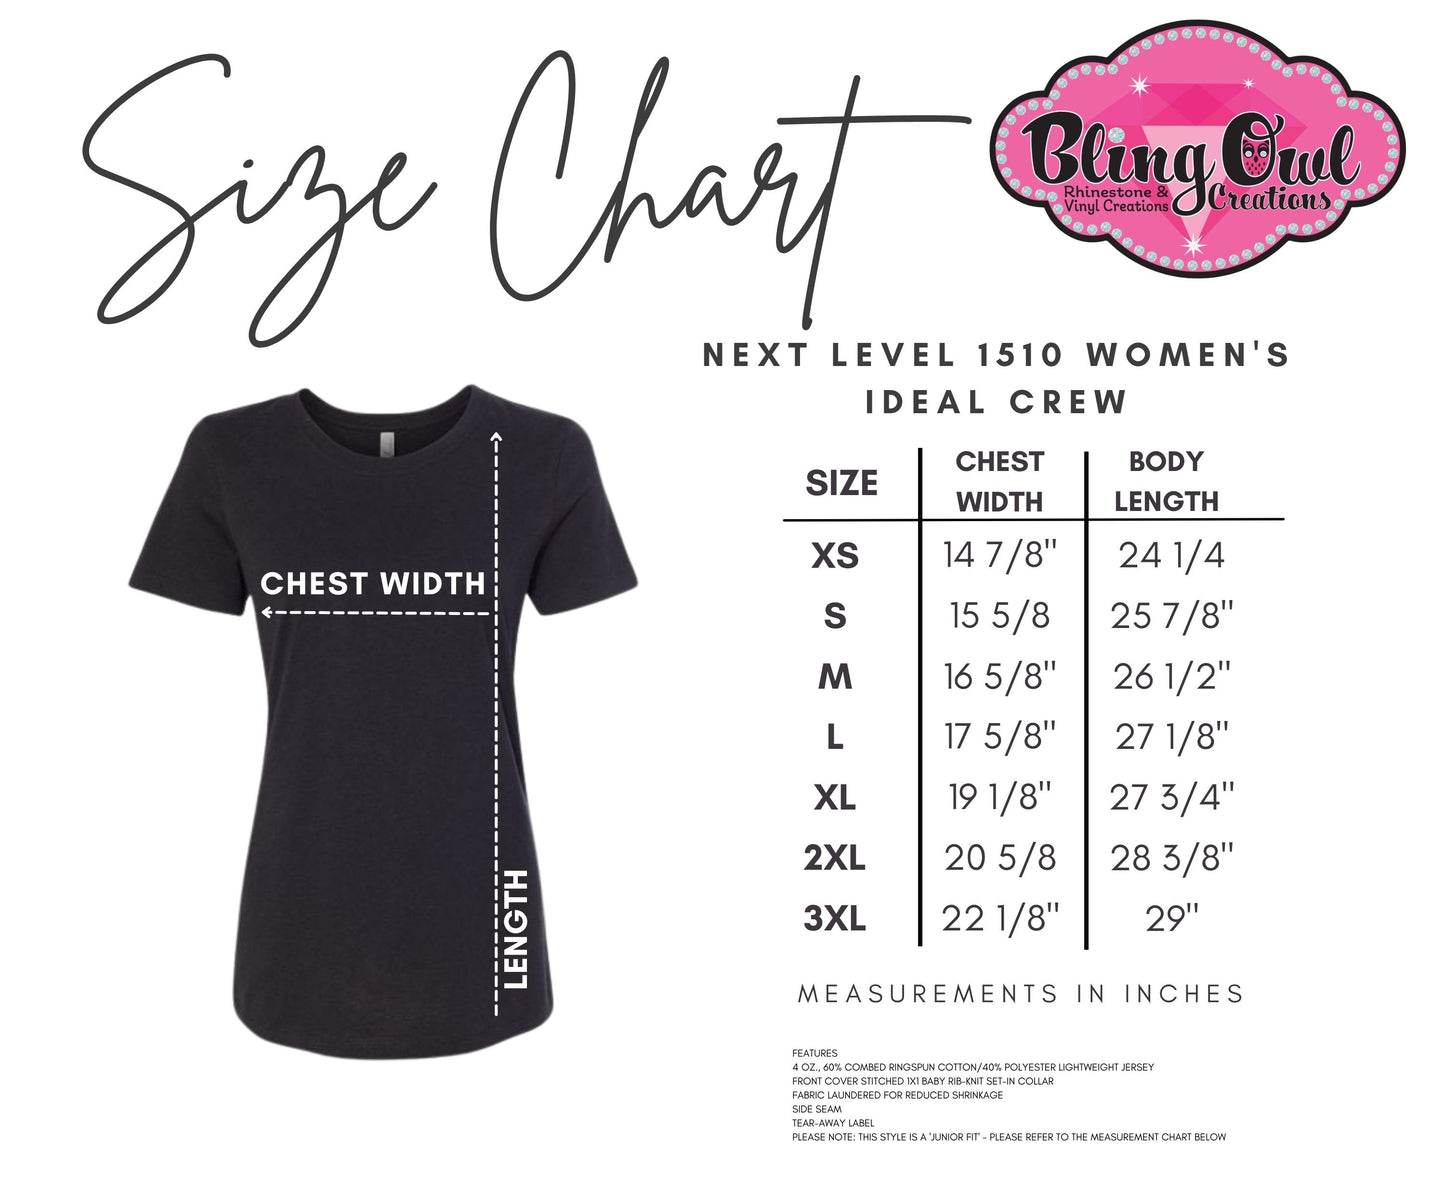 Women's Fitted (Snug fit) Sizing Charts